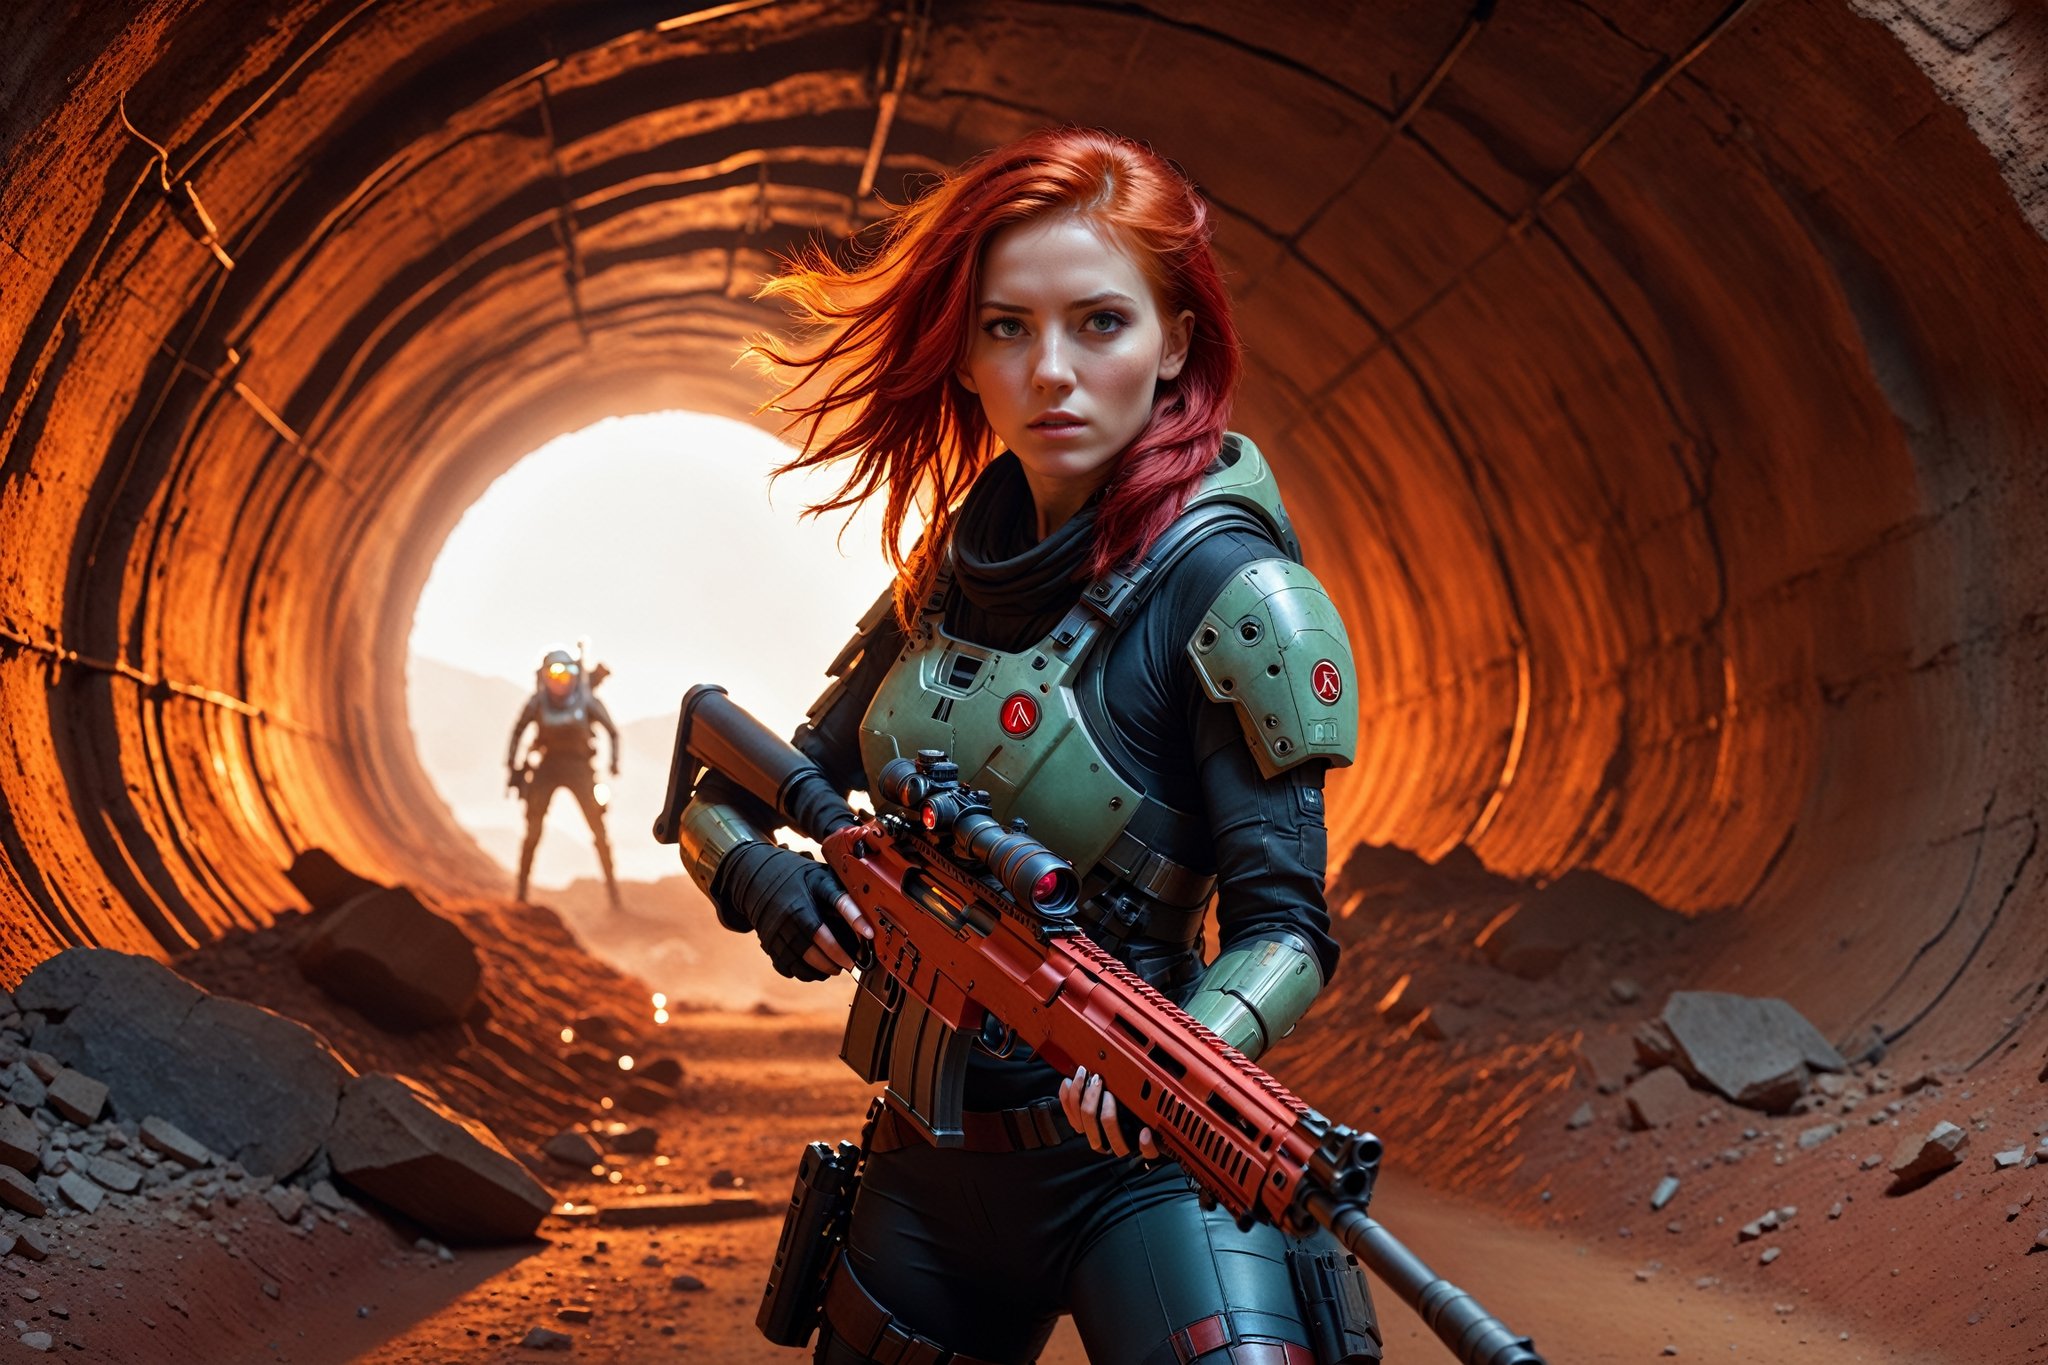 photographic, super realistic, masterpiece, 4K, HDR, quality image, cinematic, 
action_pose, 
sci-fi, 
"A 23 year old woman with red hair aims a rifle down an abandoned mining tunnel on mars.",